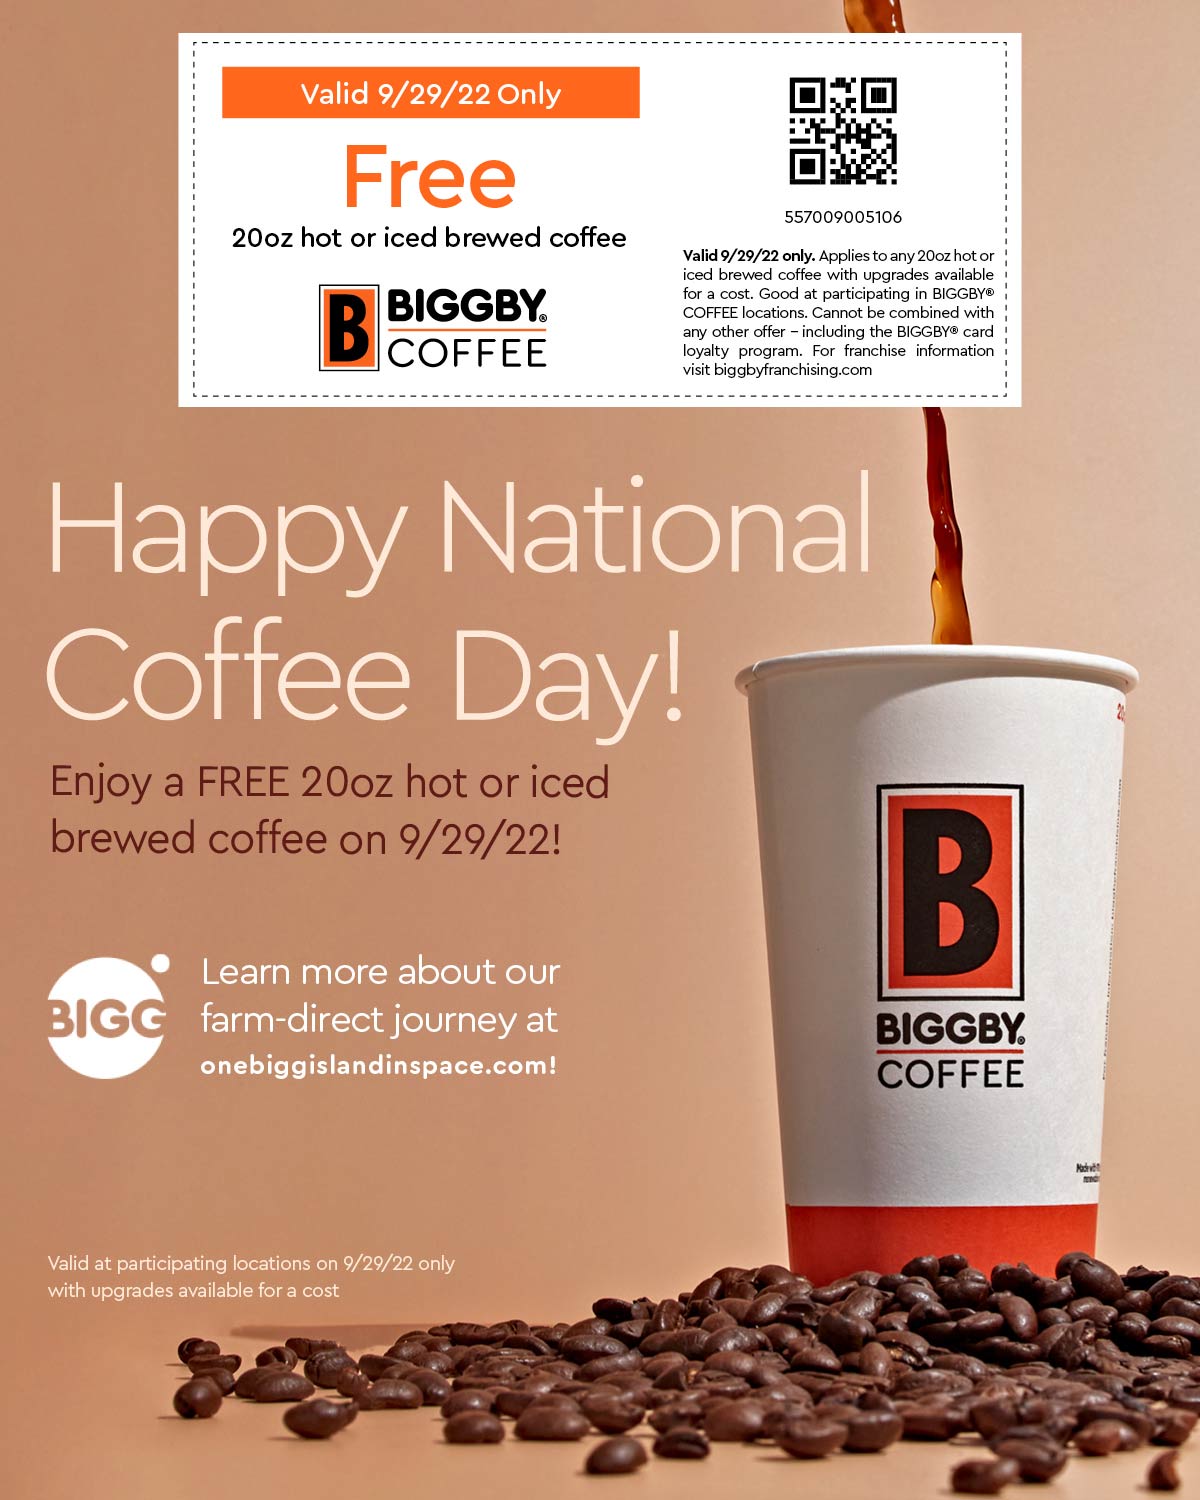 Biggby Coffee coupons & promo code for [December 2022]